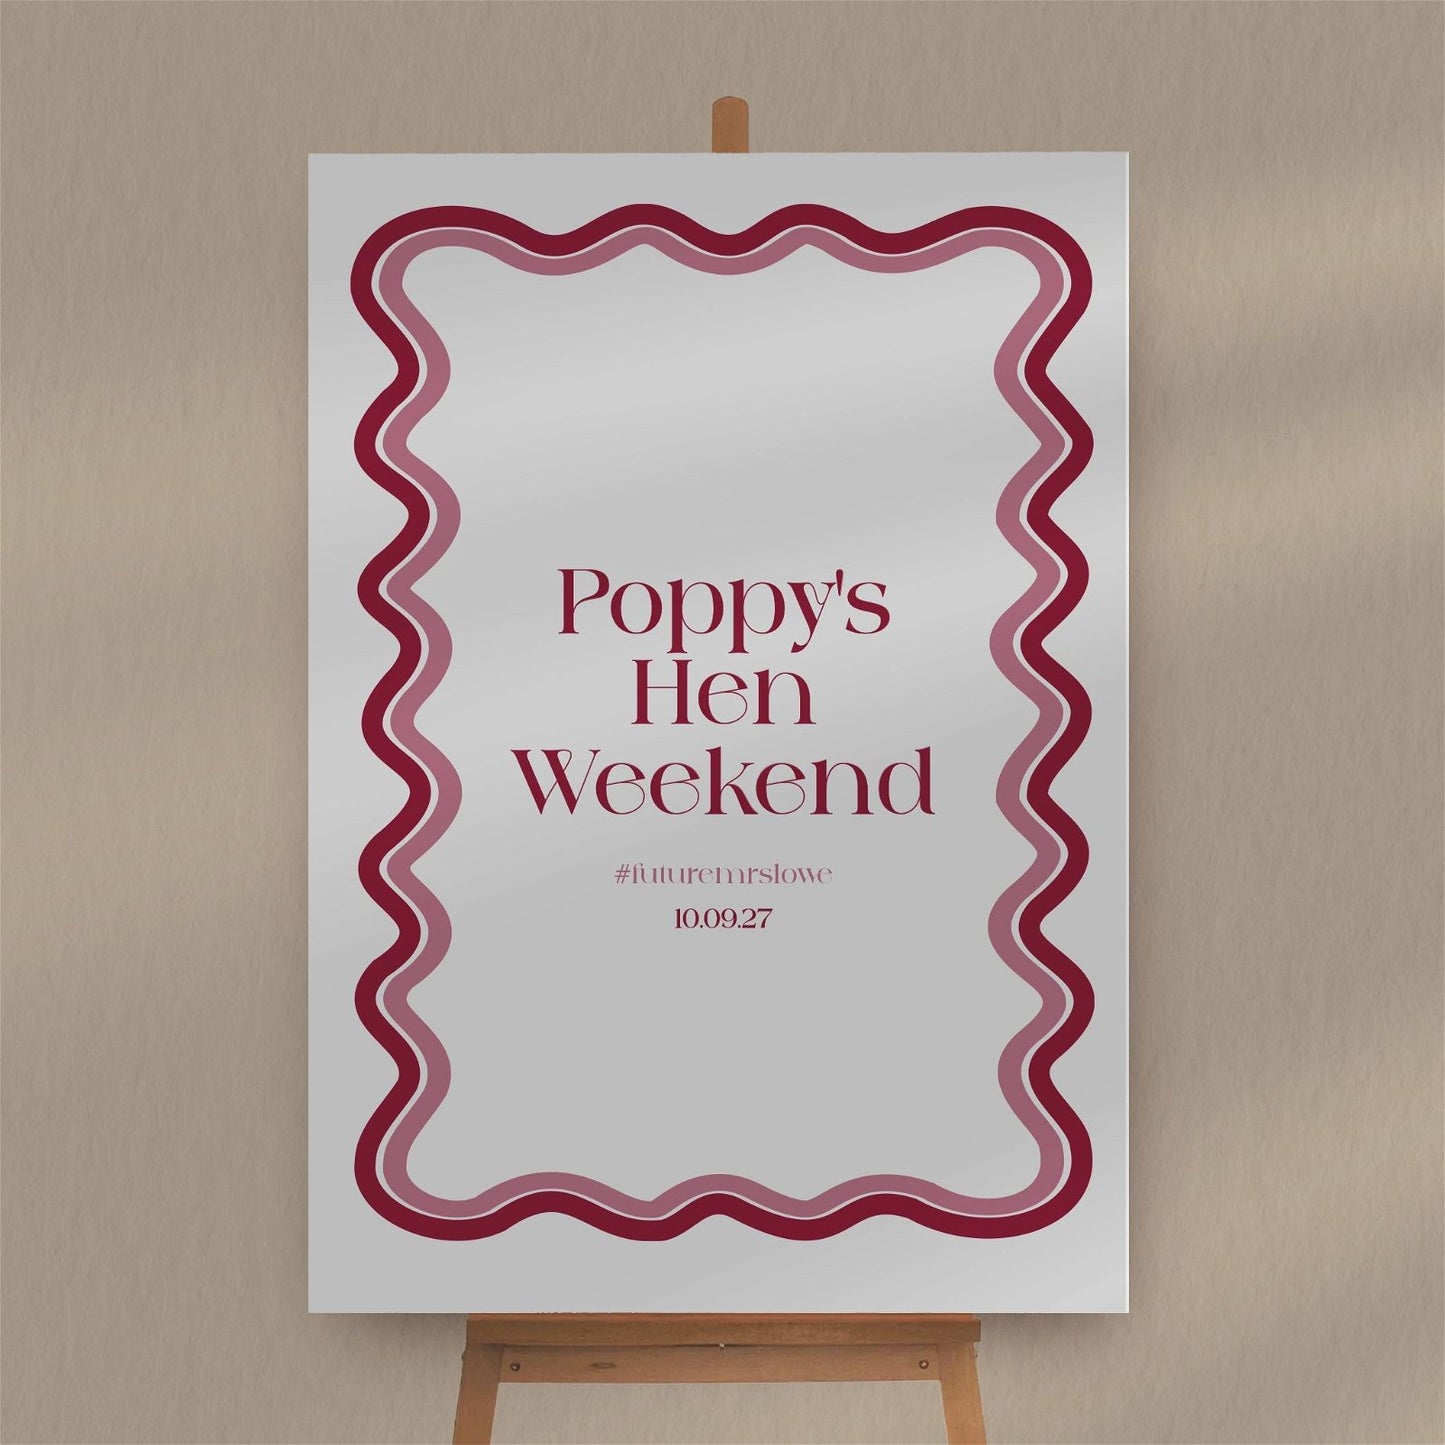 Wavy Hen Party Sign  Ivy and Gold Wedding Stationery   